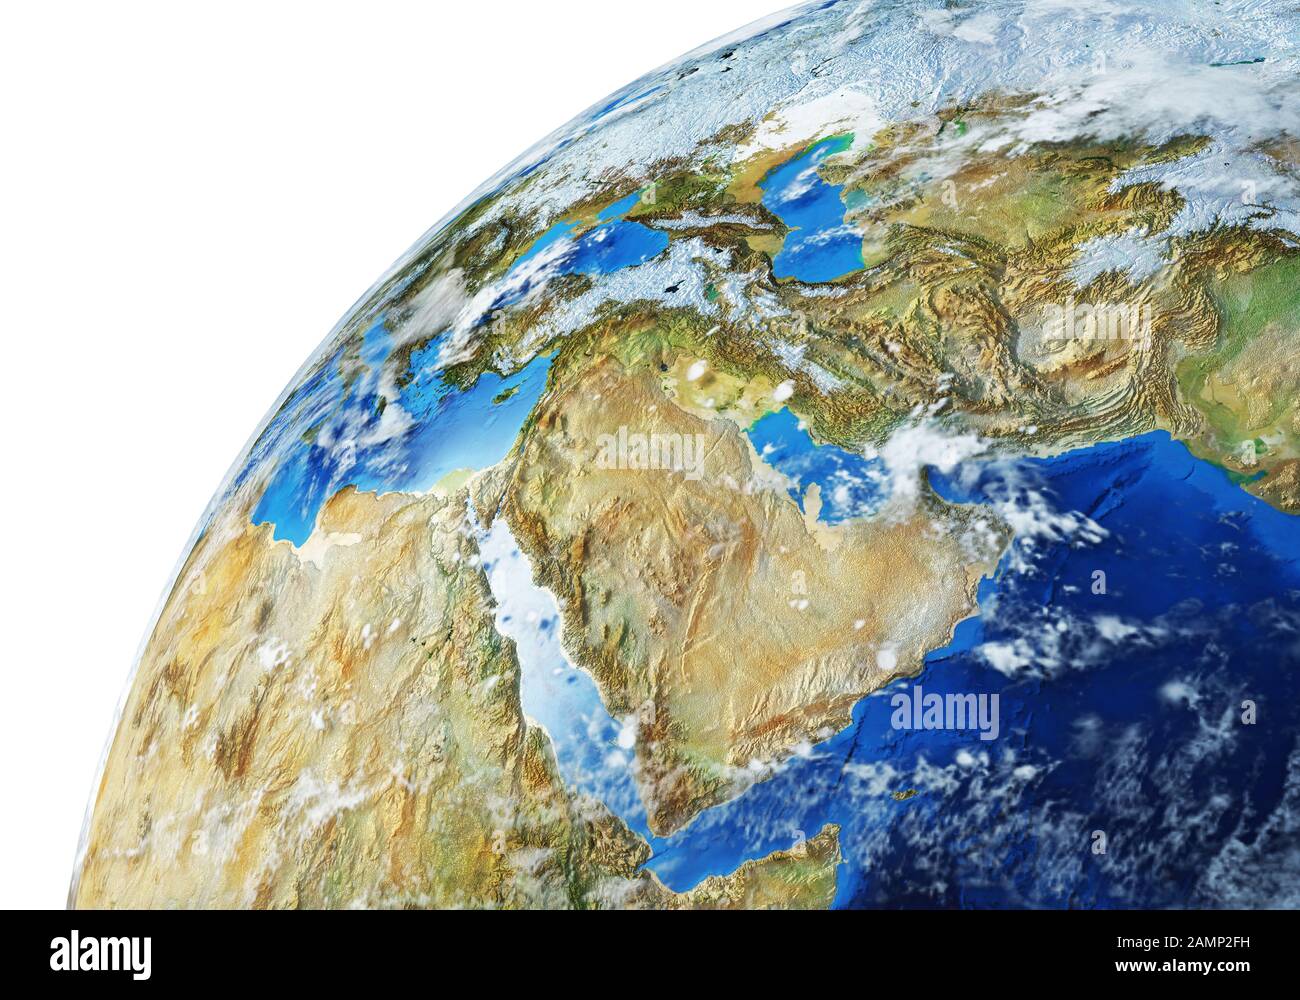 Earth globe close- up of the Middle East area. Very detailed and Photo realistic. With clouds. (Original maps provided by NASA.) Stock Photo